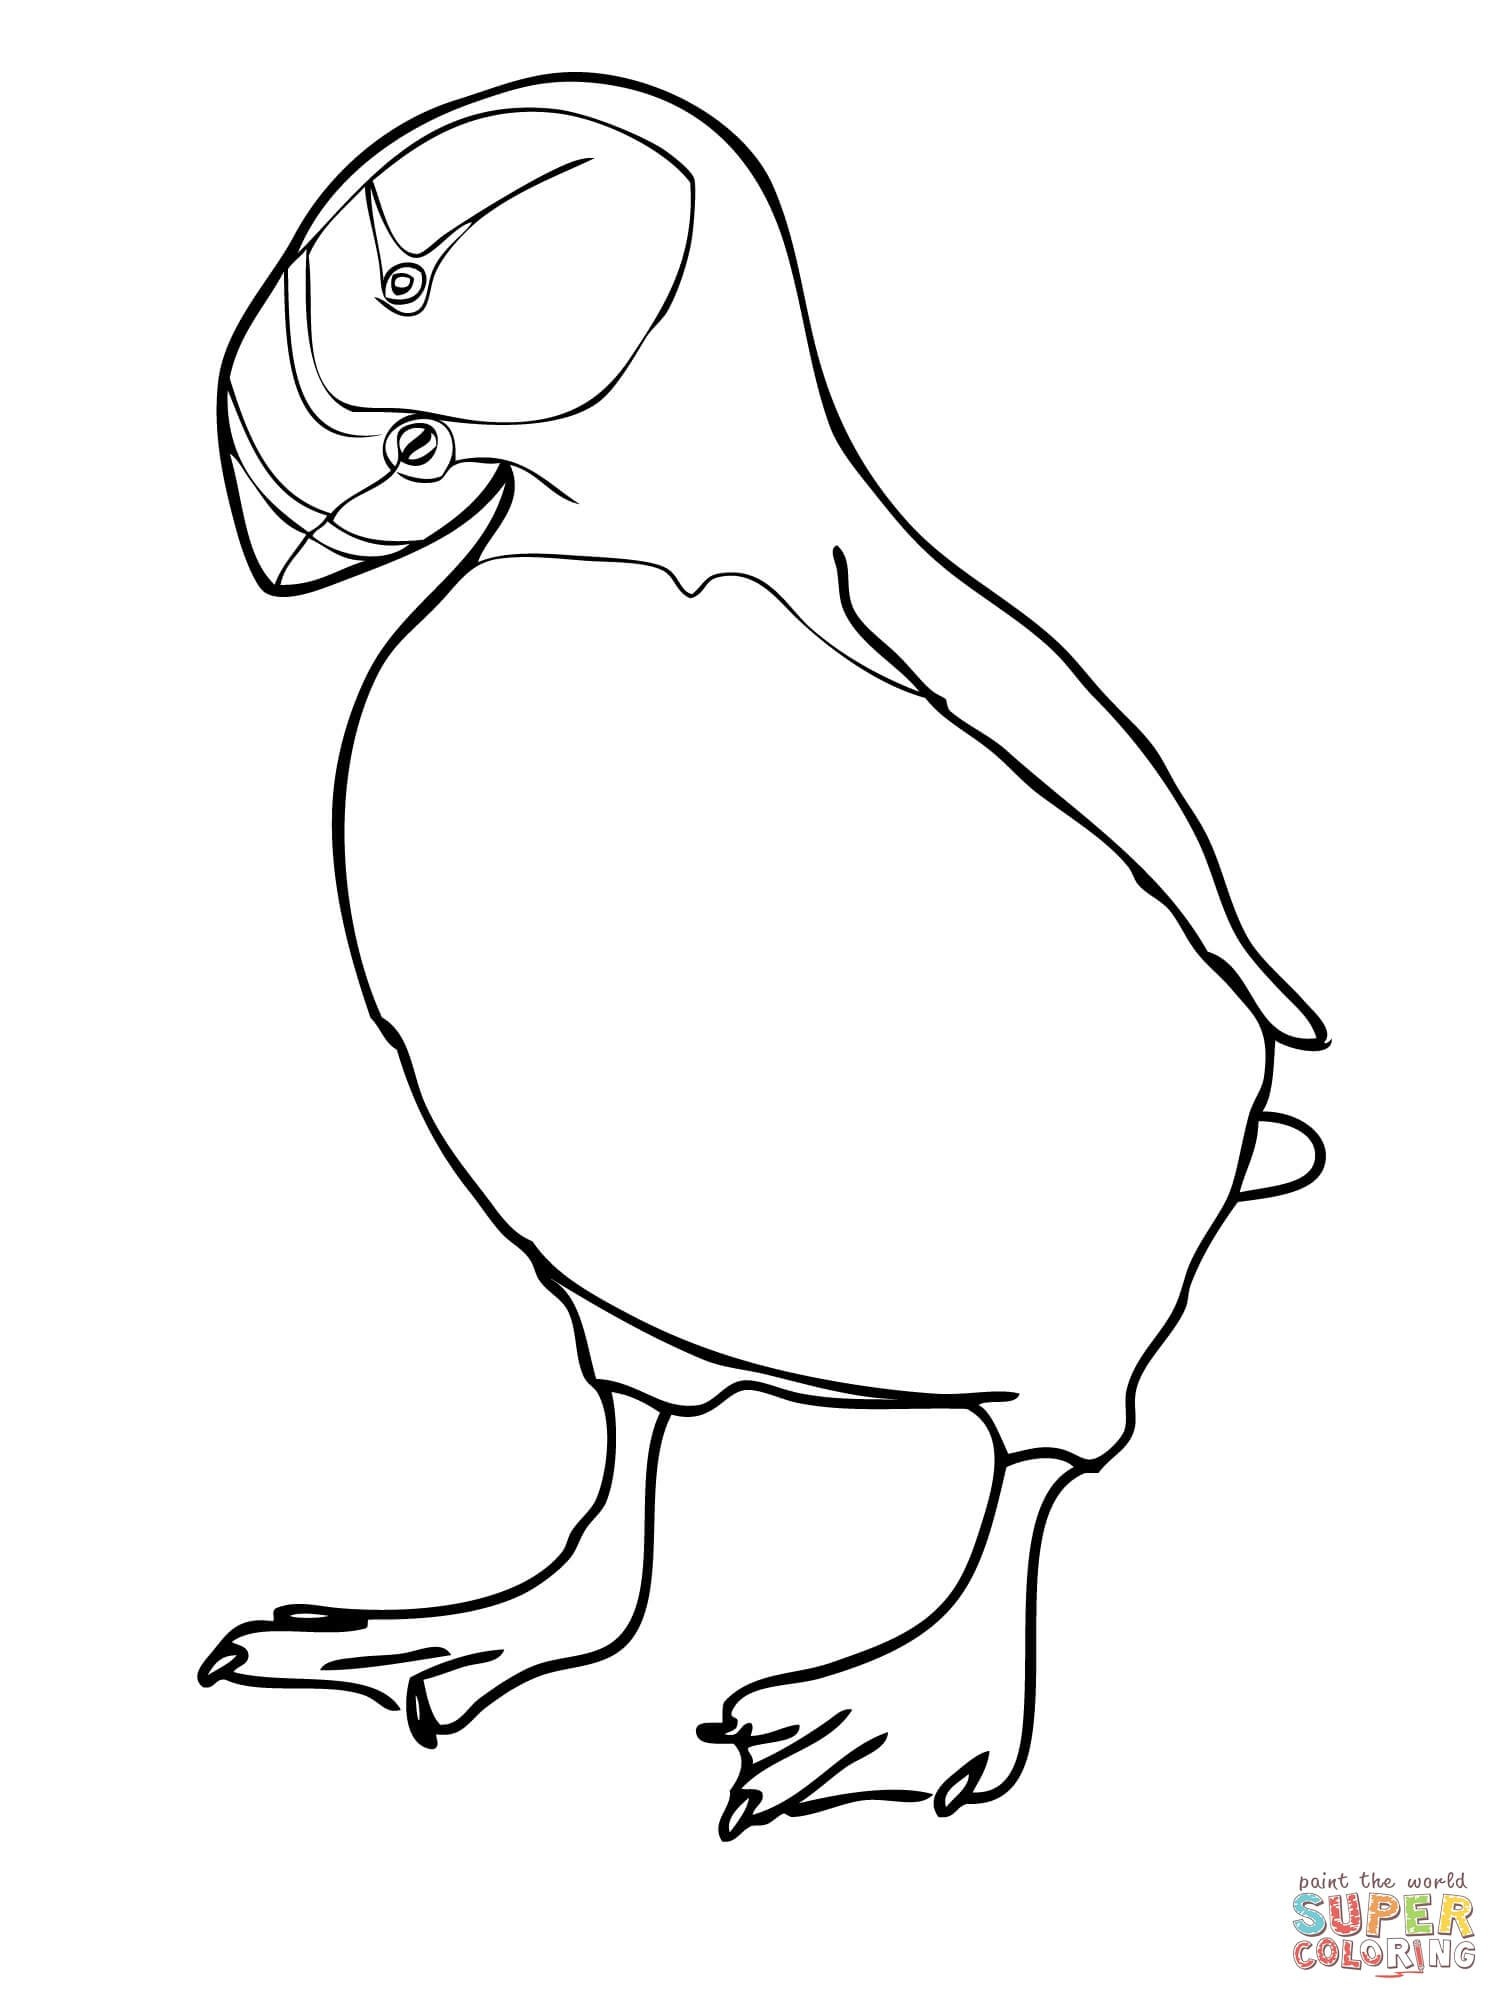 Rock Coloring Page Coloring Pages Puffin Rock Coloring Pages With Alana Christmas